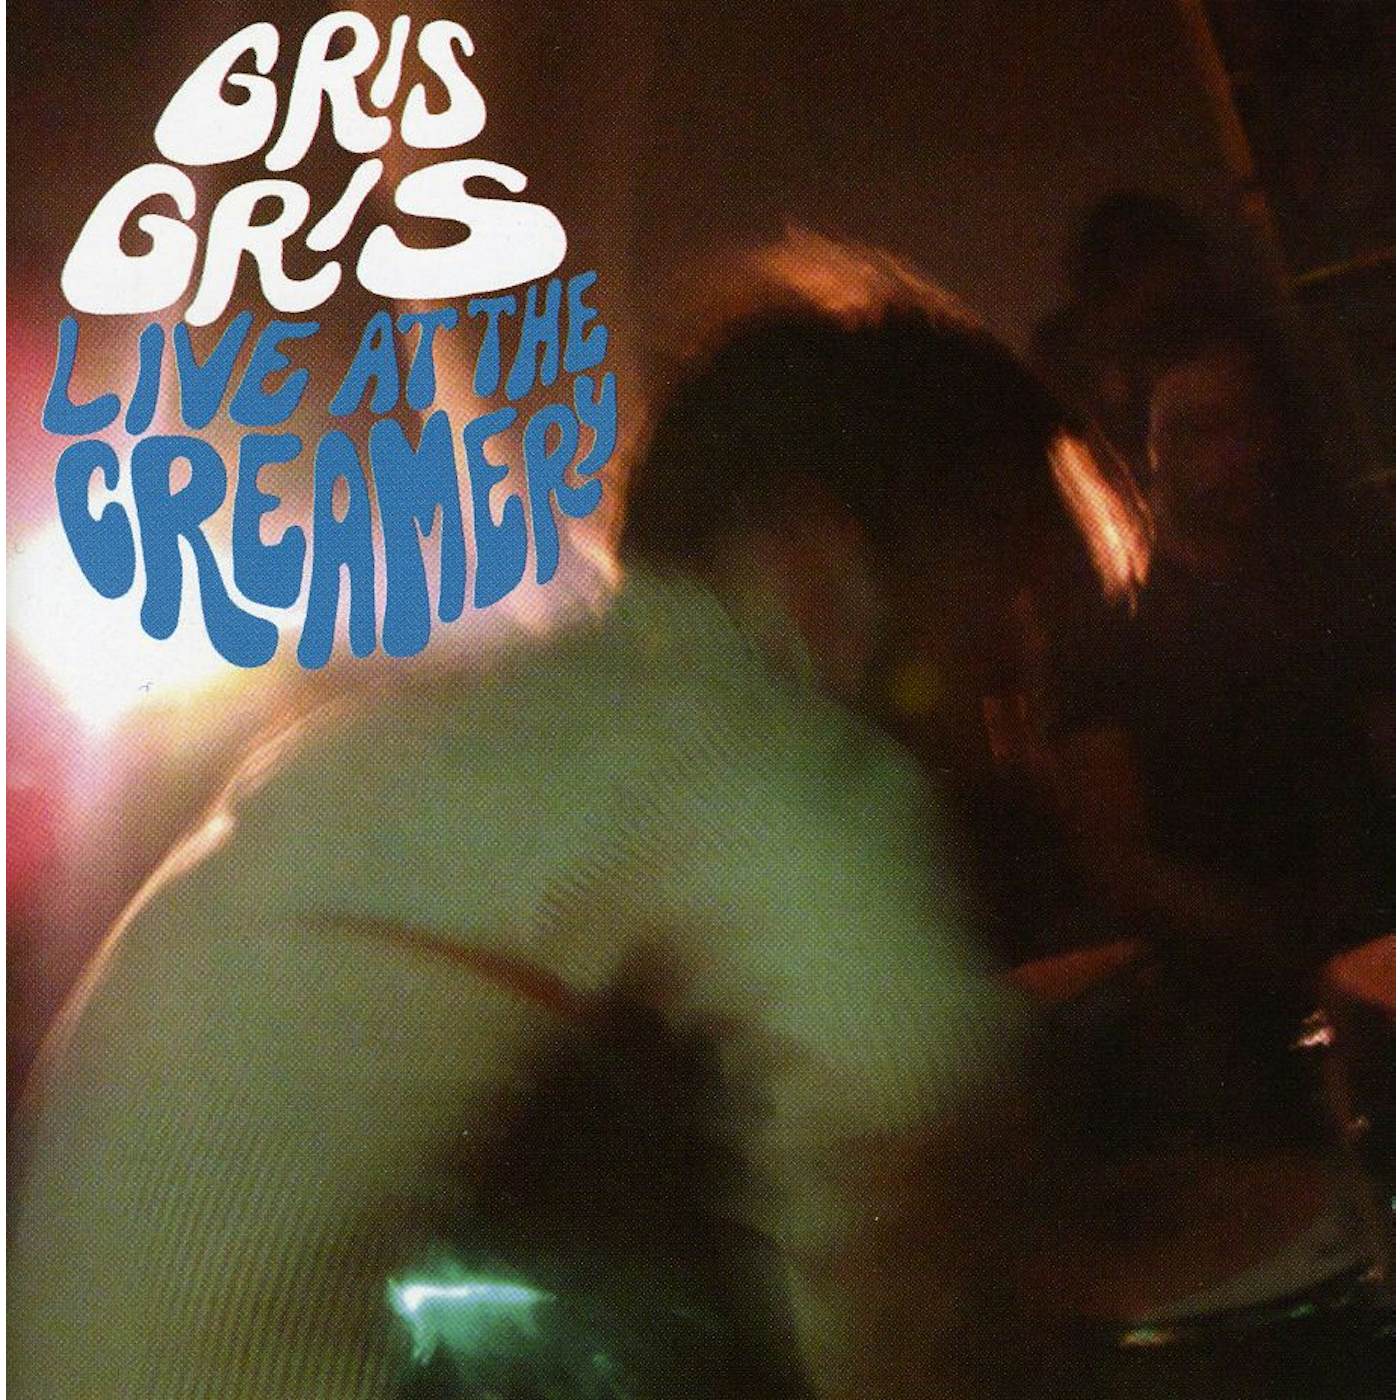 Gris Gris LIVE AT THE CREAMERY CD